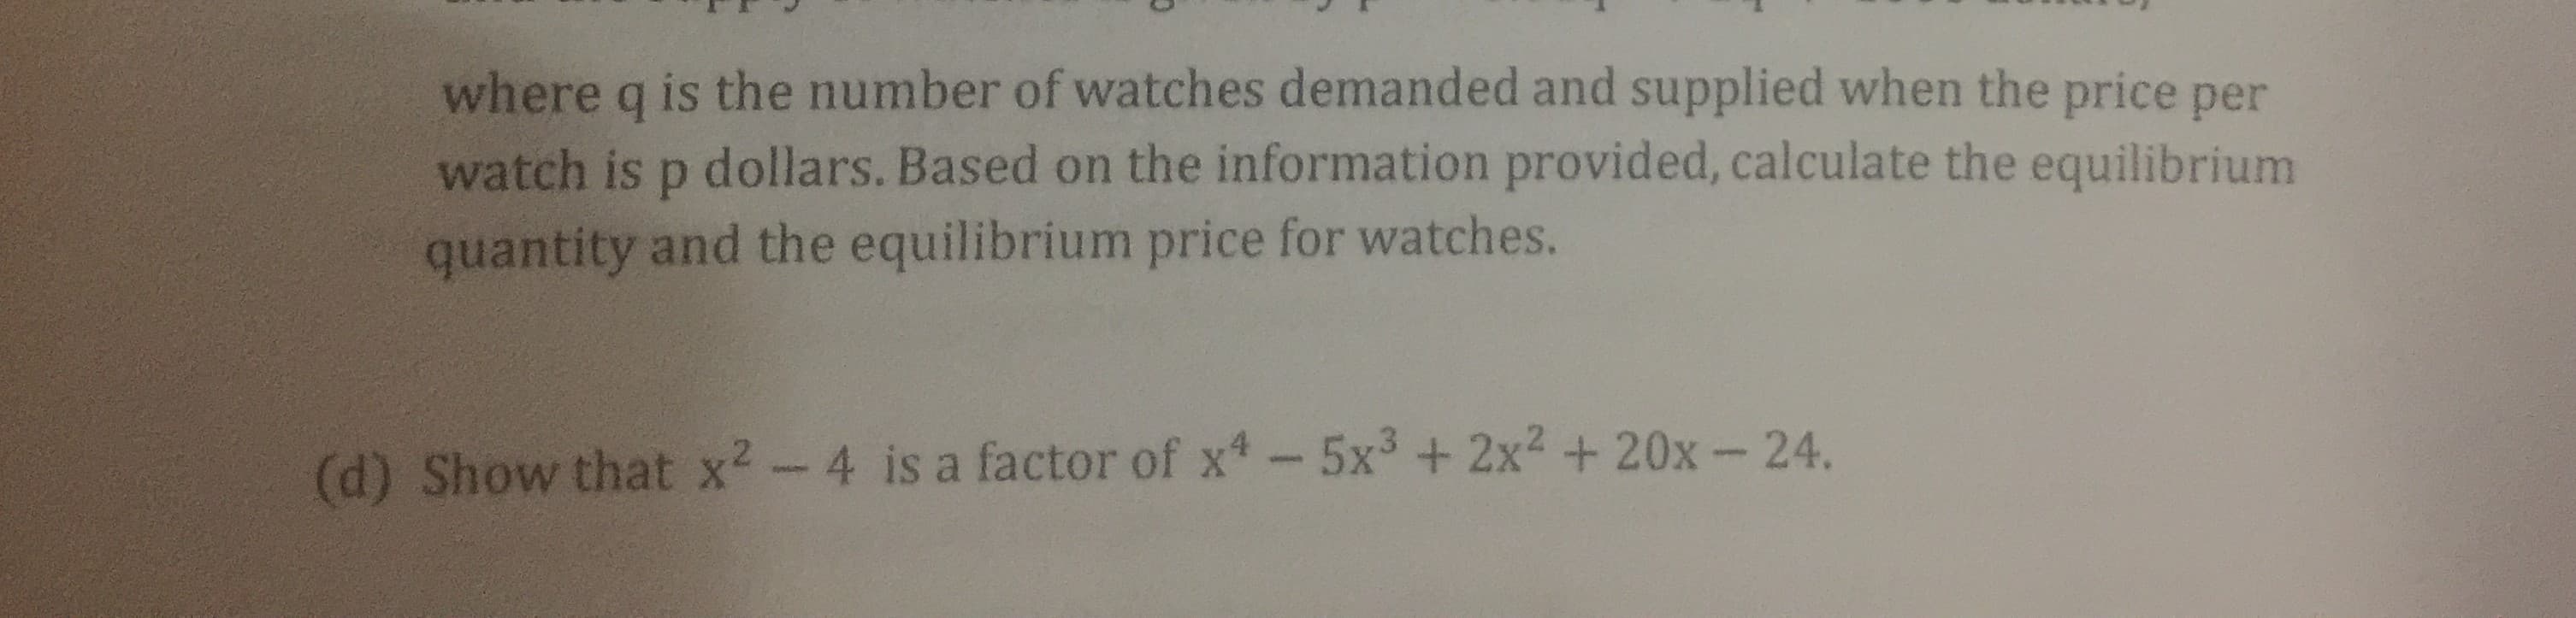 where q is the number of watches demanded and supplied when the price per
watch is p dollars. Based on the information provided, calculate the equilibrium
quantity and the equilibrium price for watches.
(d) Show that x2-4 is a factor of x-5x3+ 2x2 + 20x-24.
